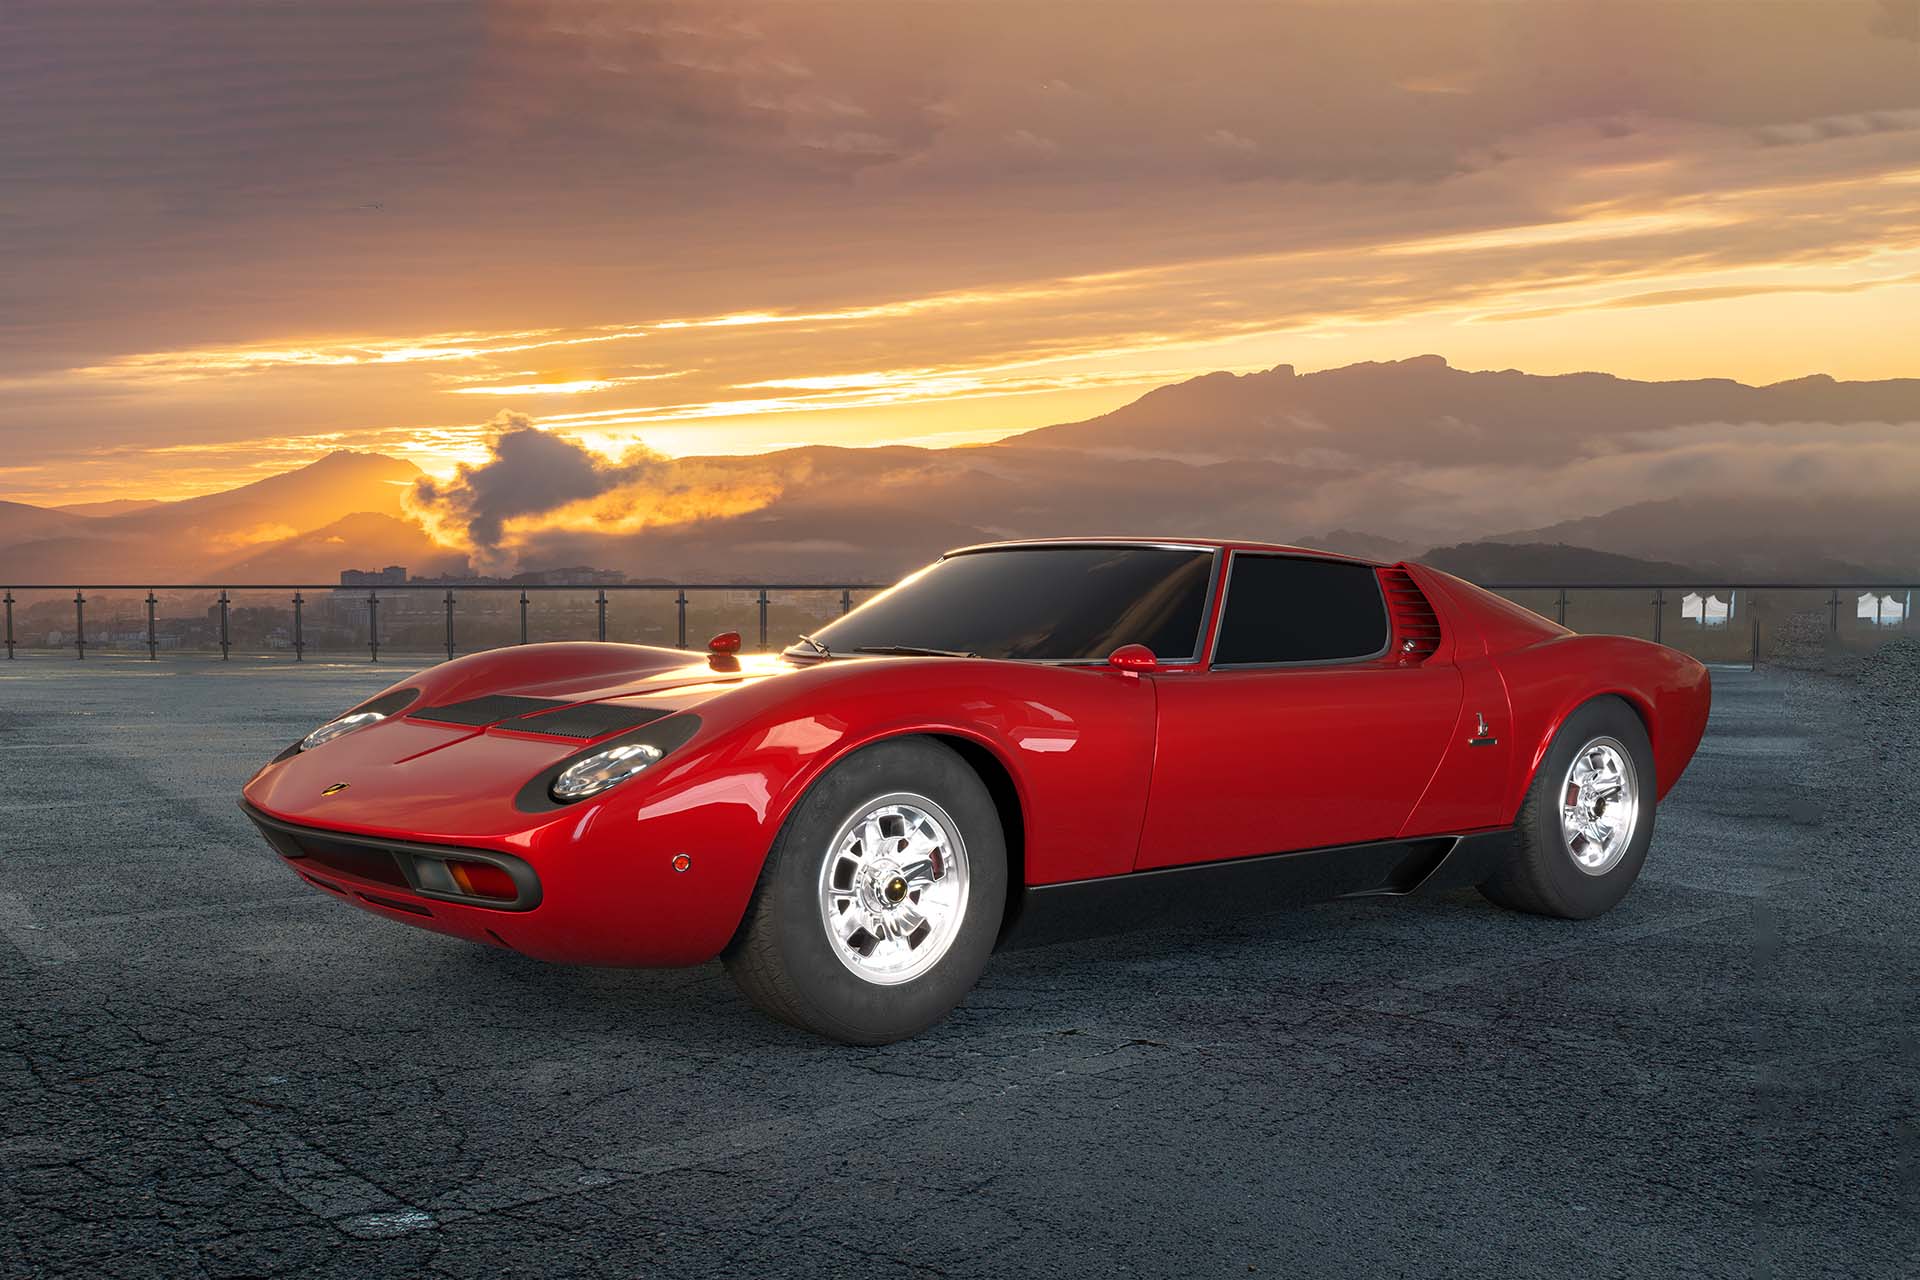 Lamborghini Miura in red at sunset with clouds.